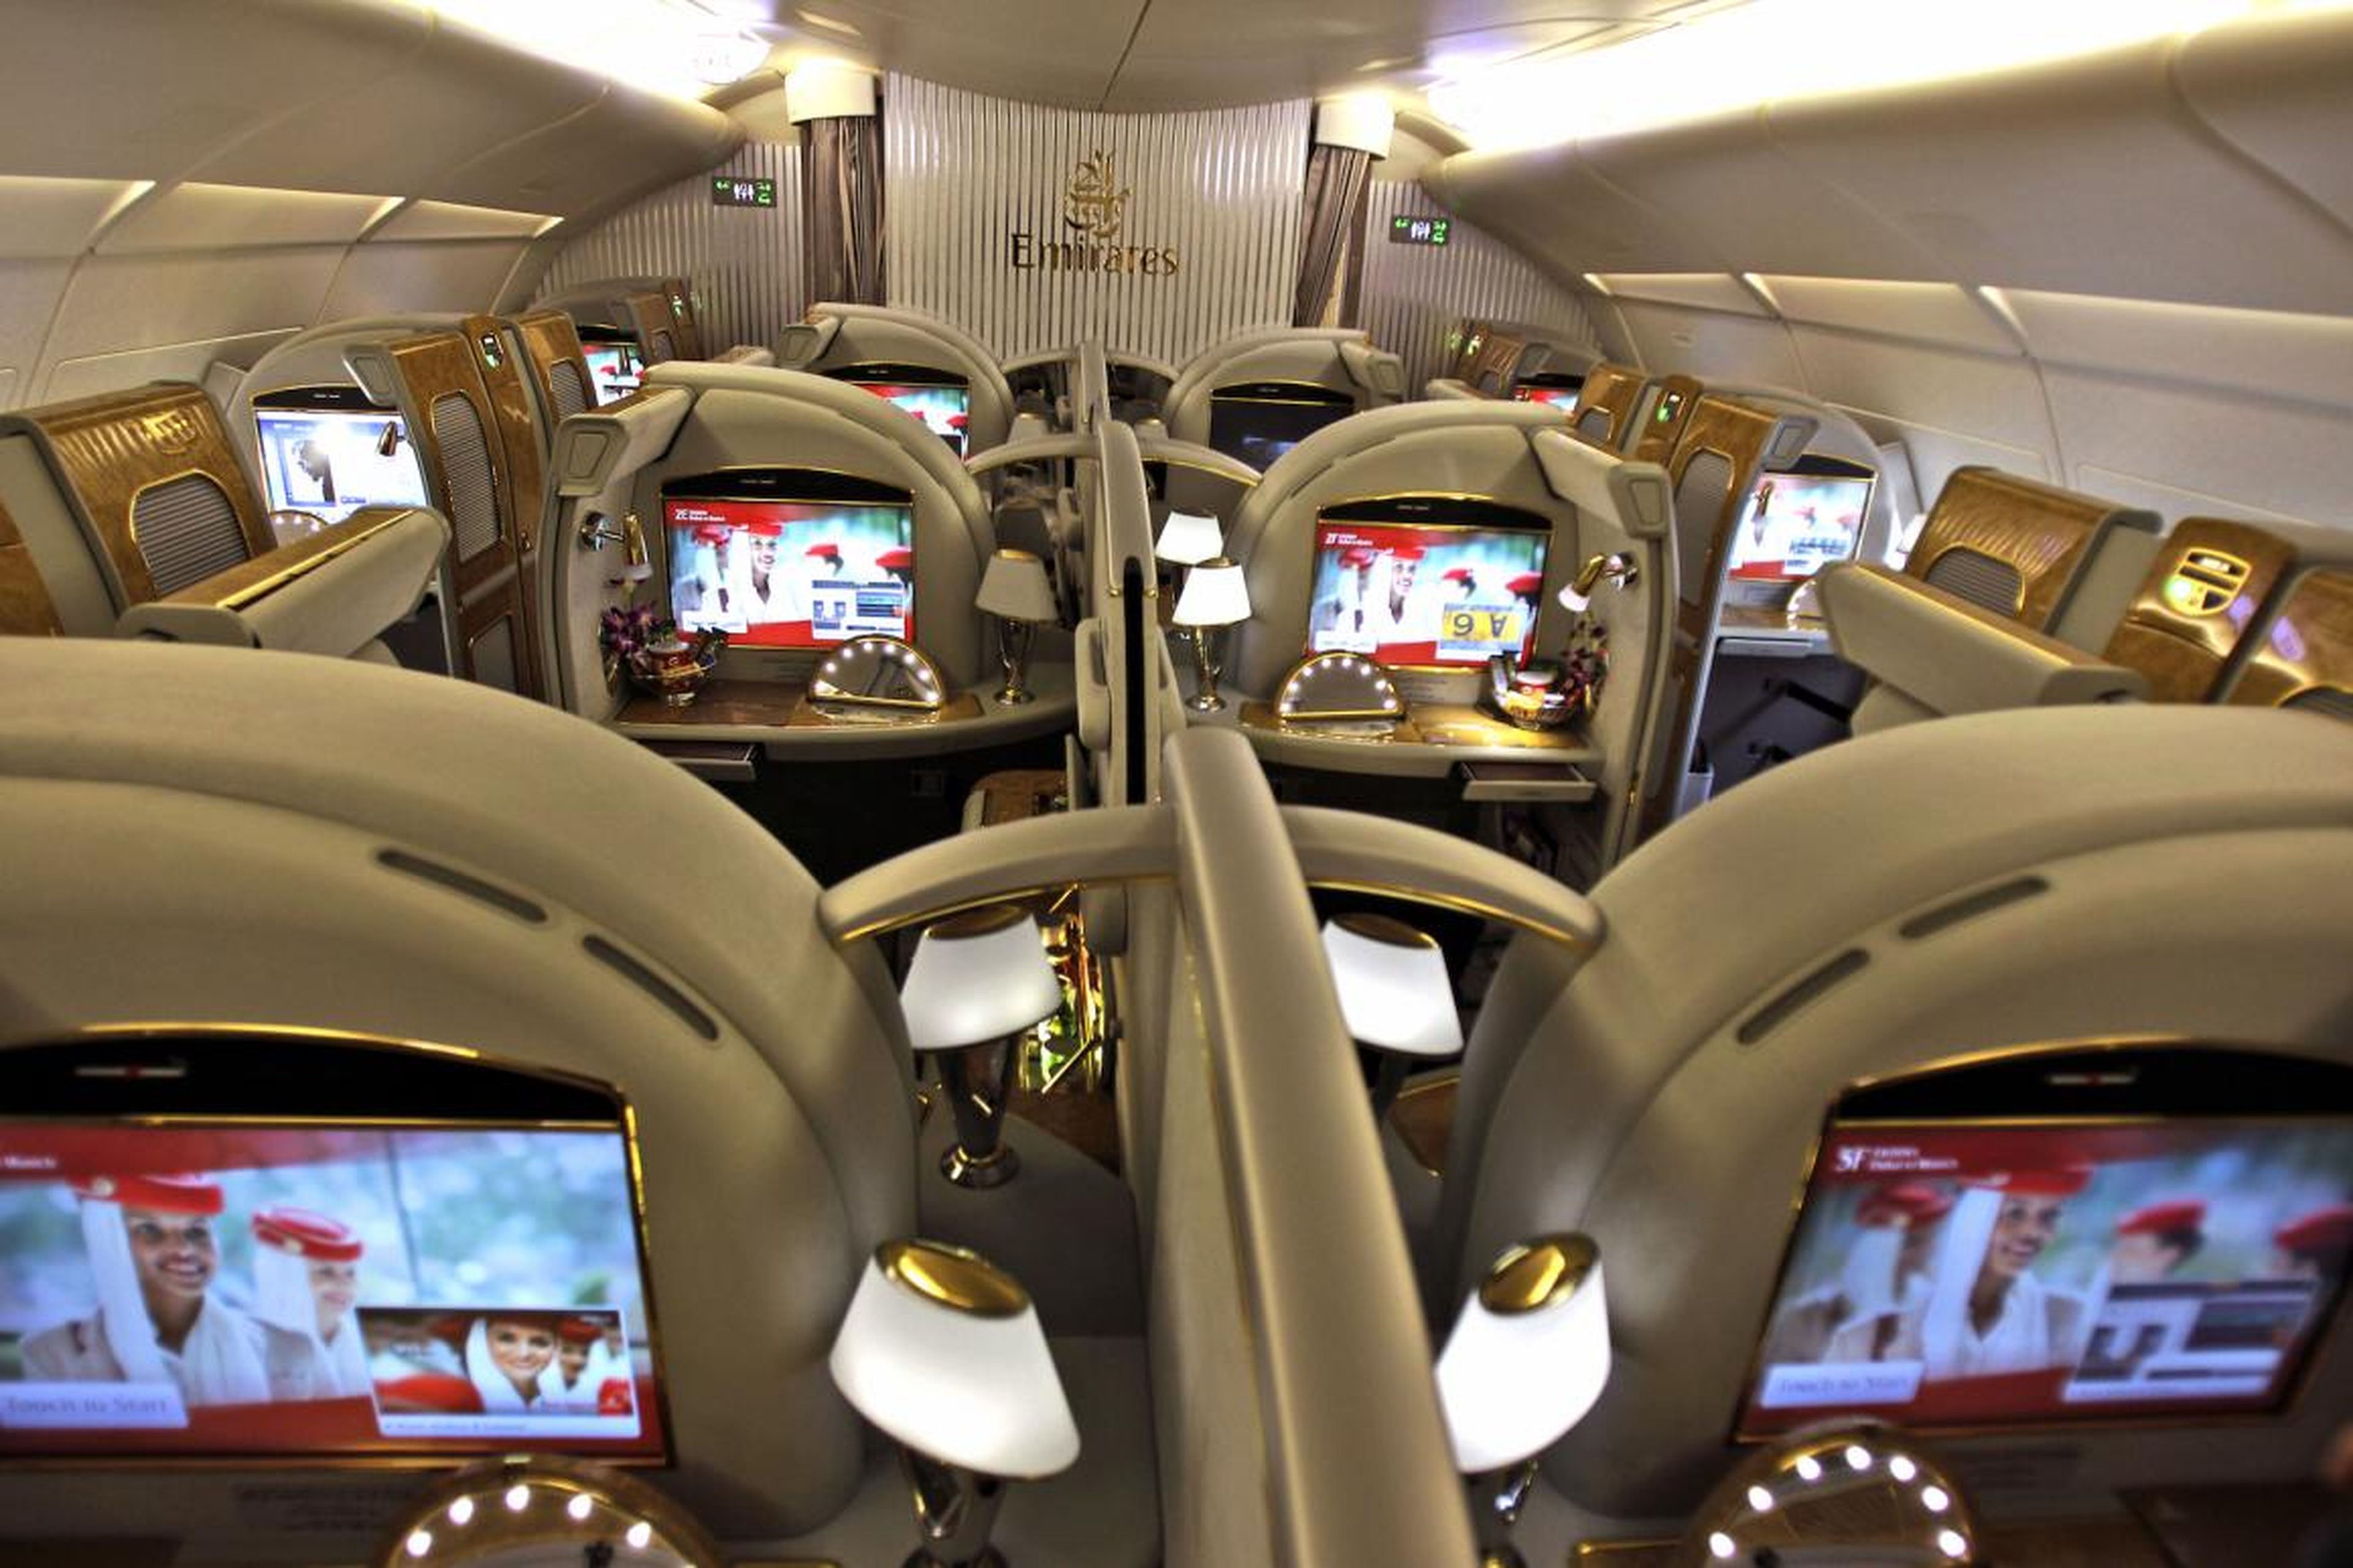 And then there are the first-class suites that Emirates offers ...